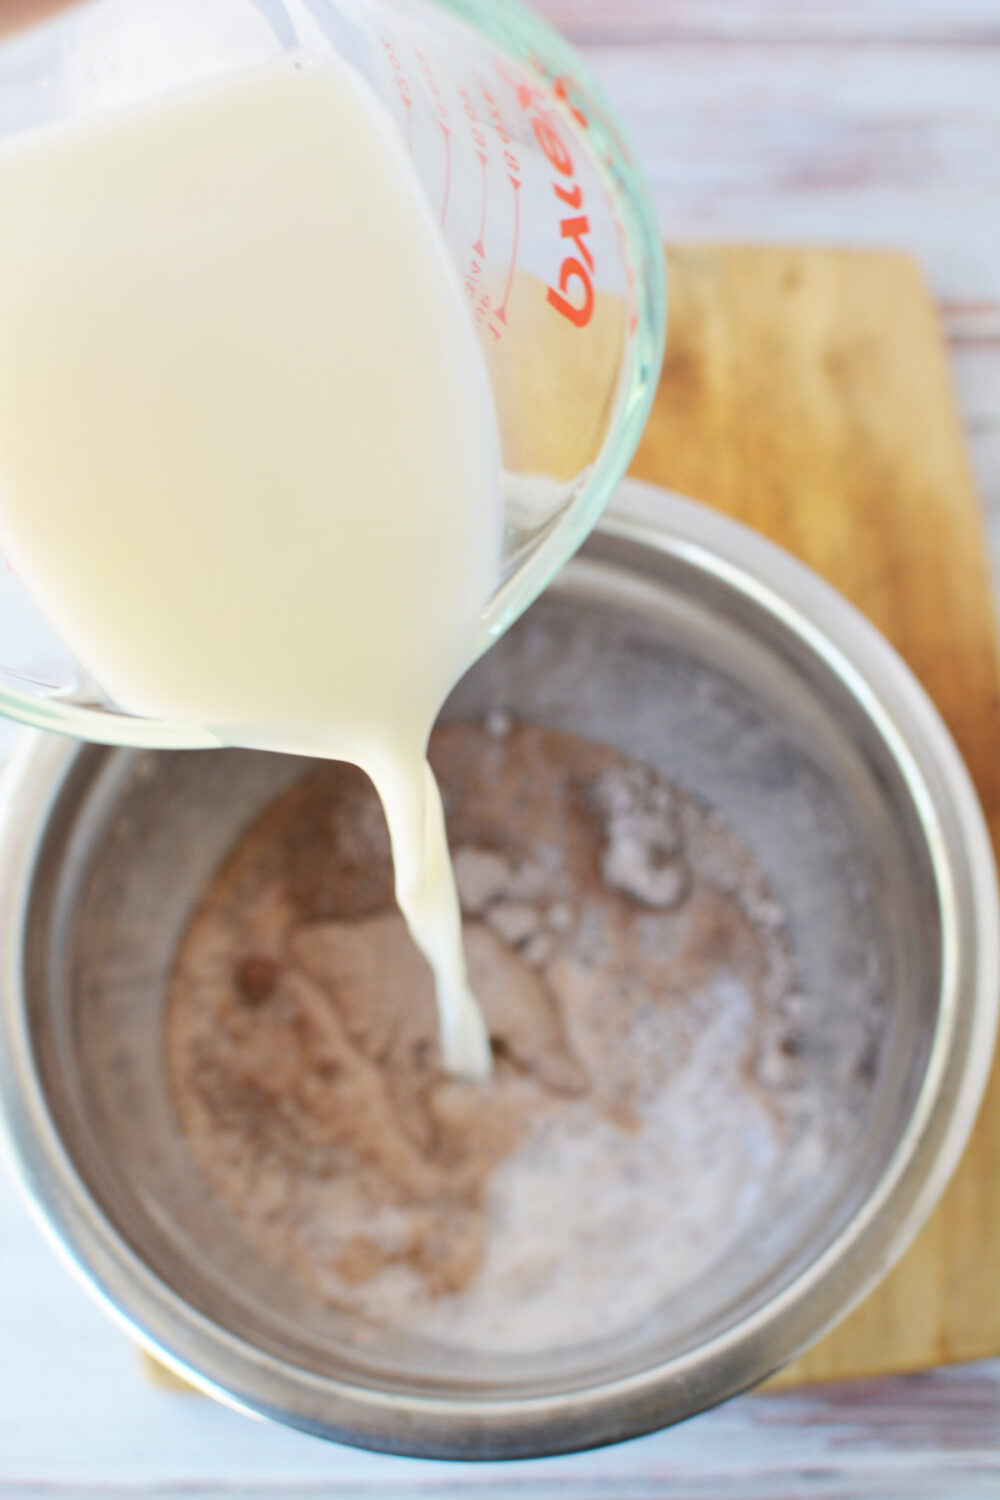 Pouring milk into chocolate pudding mix.